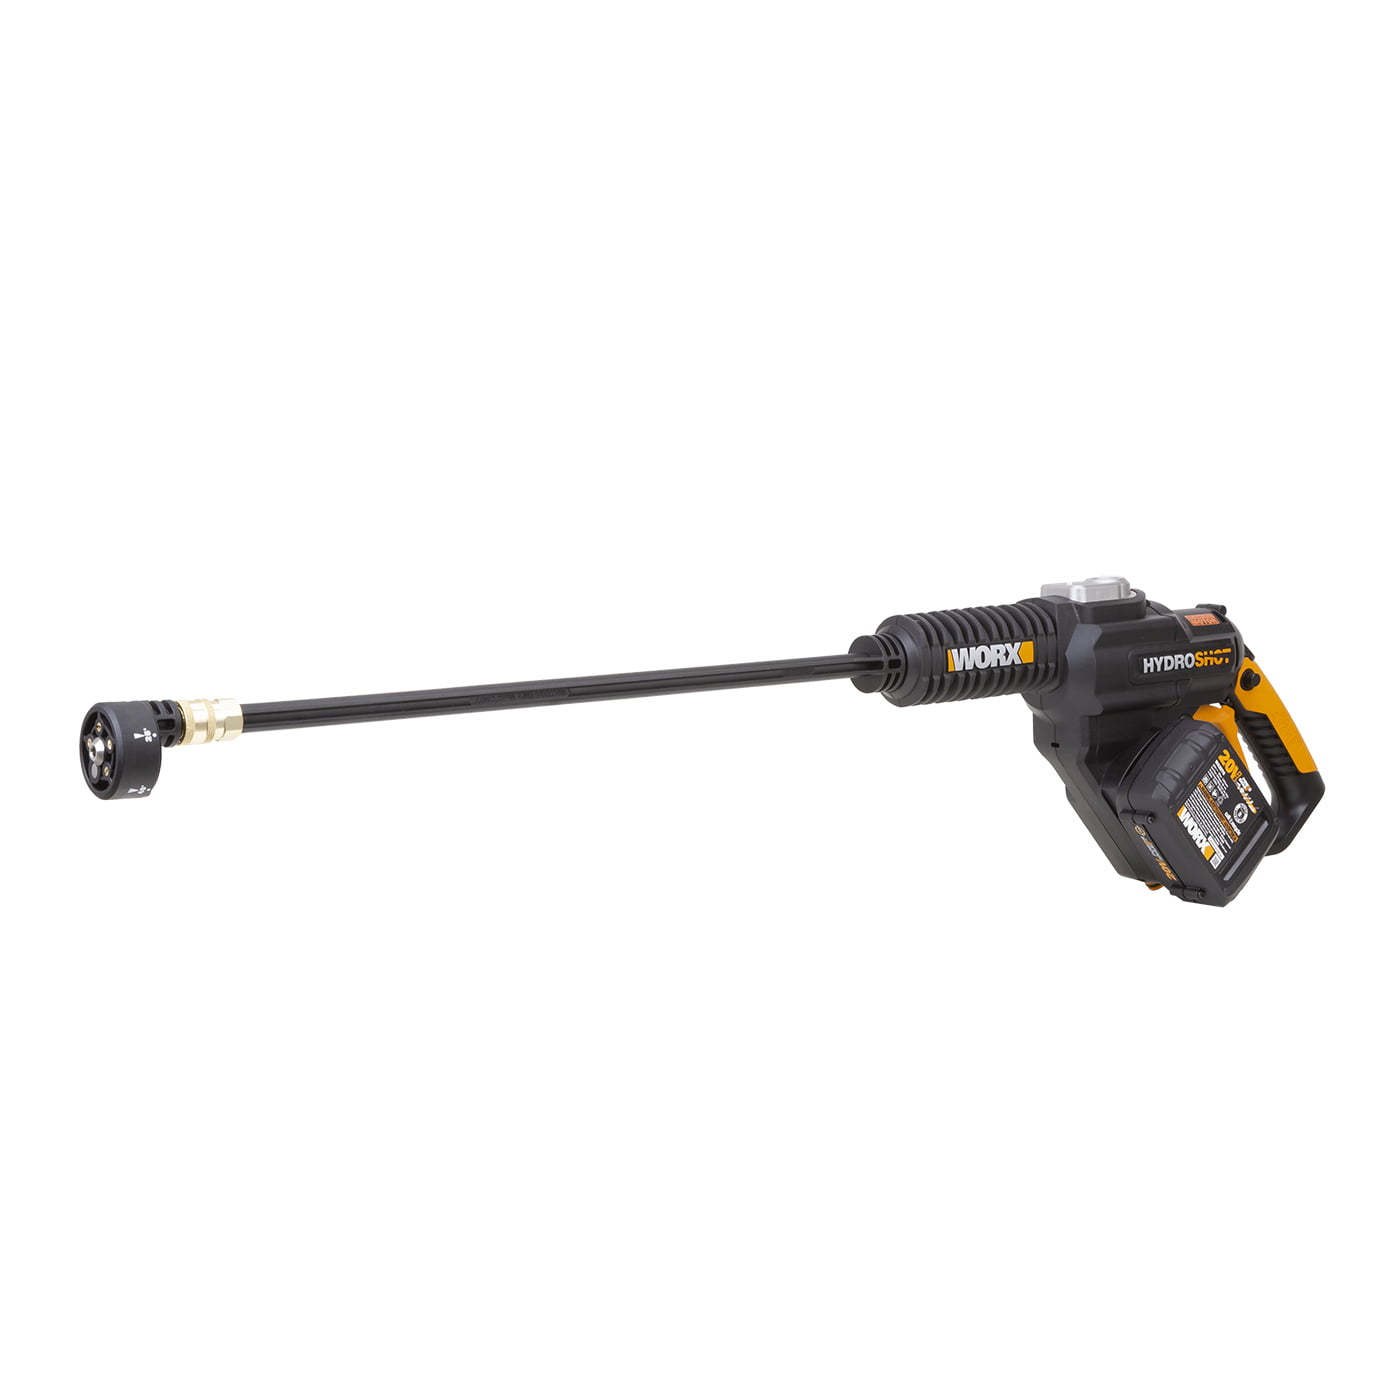 WORX 5-in-1 Multifunctional Nozzle for Hydroshot WG629E/630/644 Cleaning Tools 